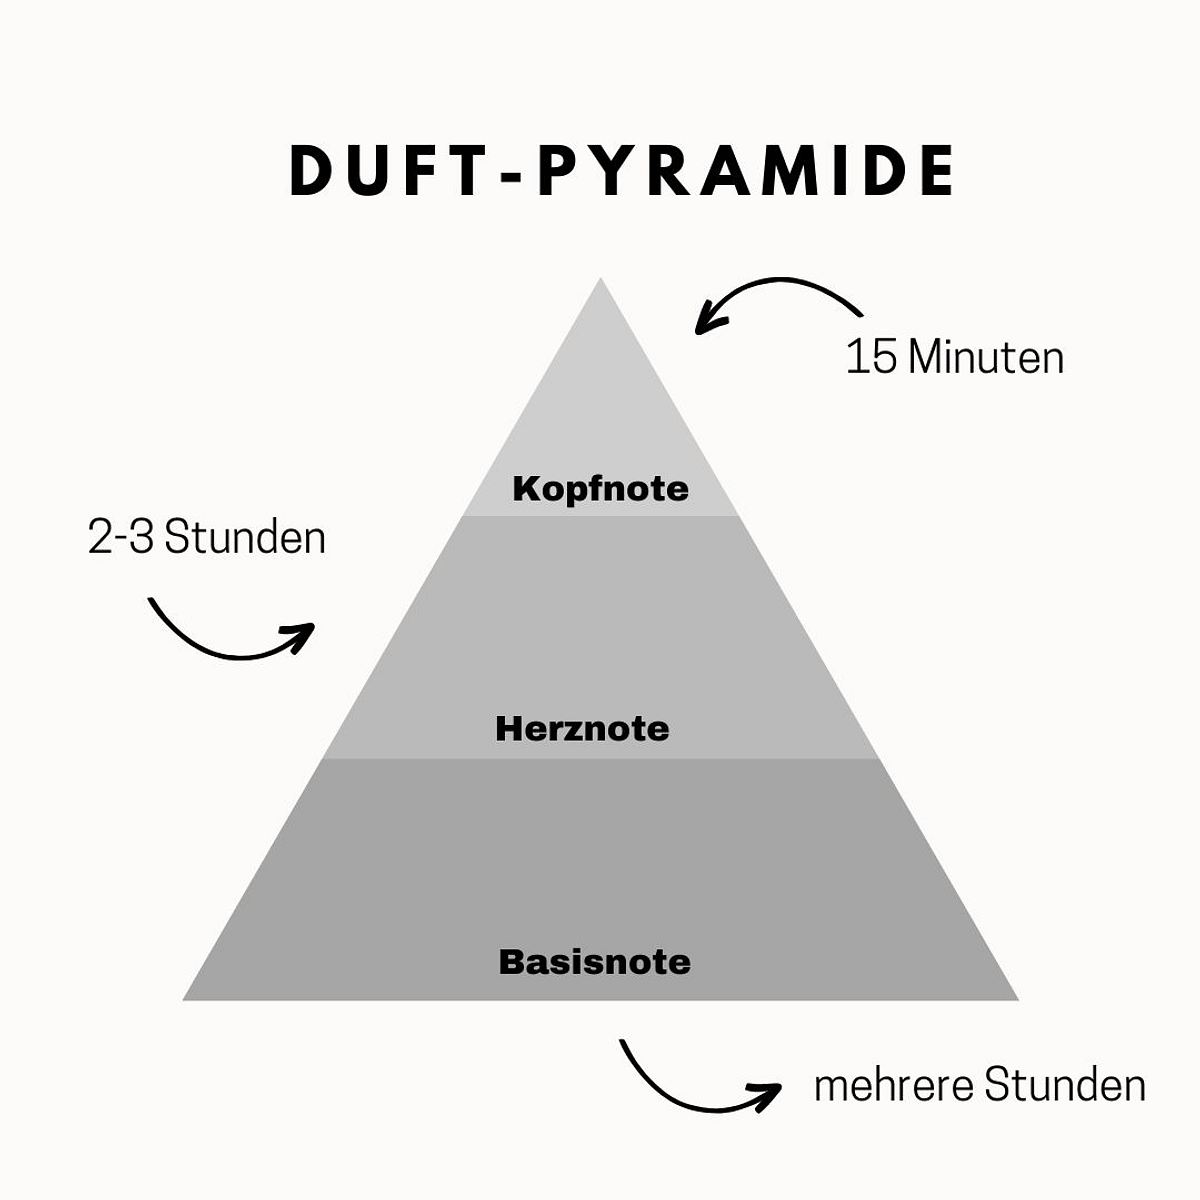 Duft-Pyramide